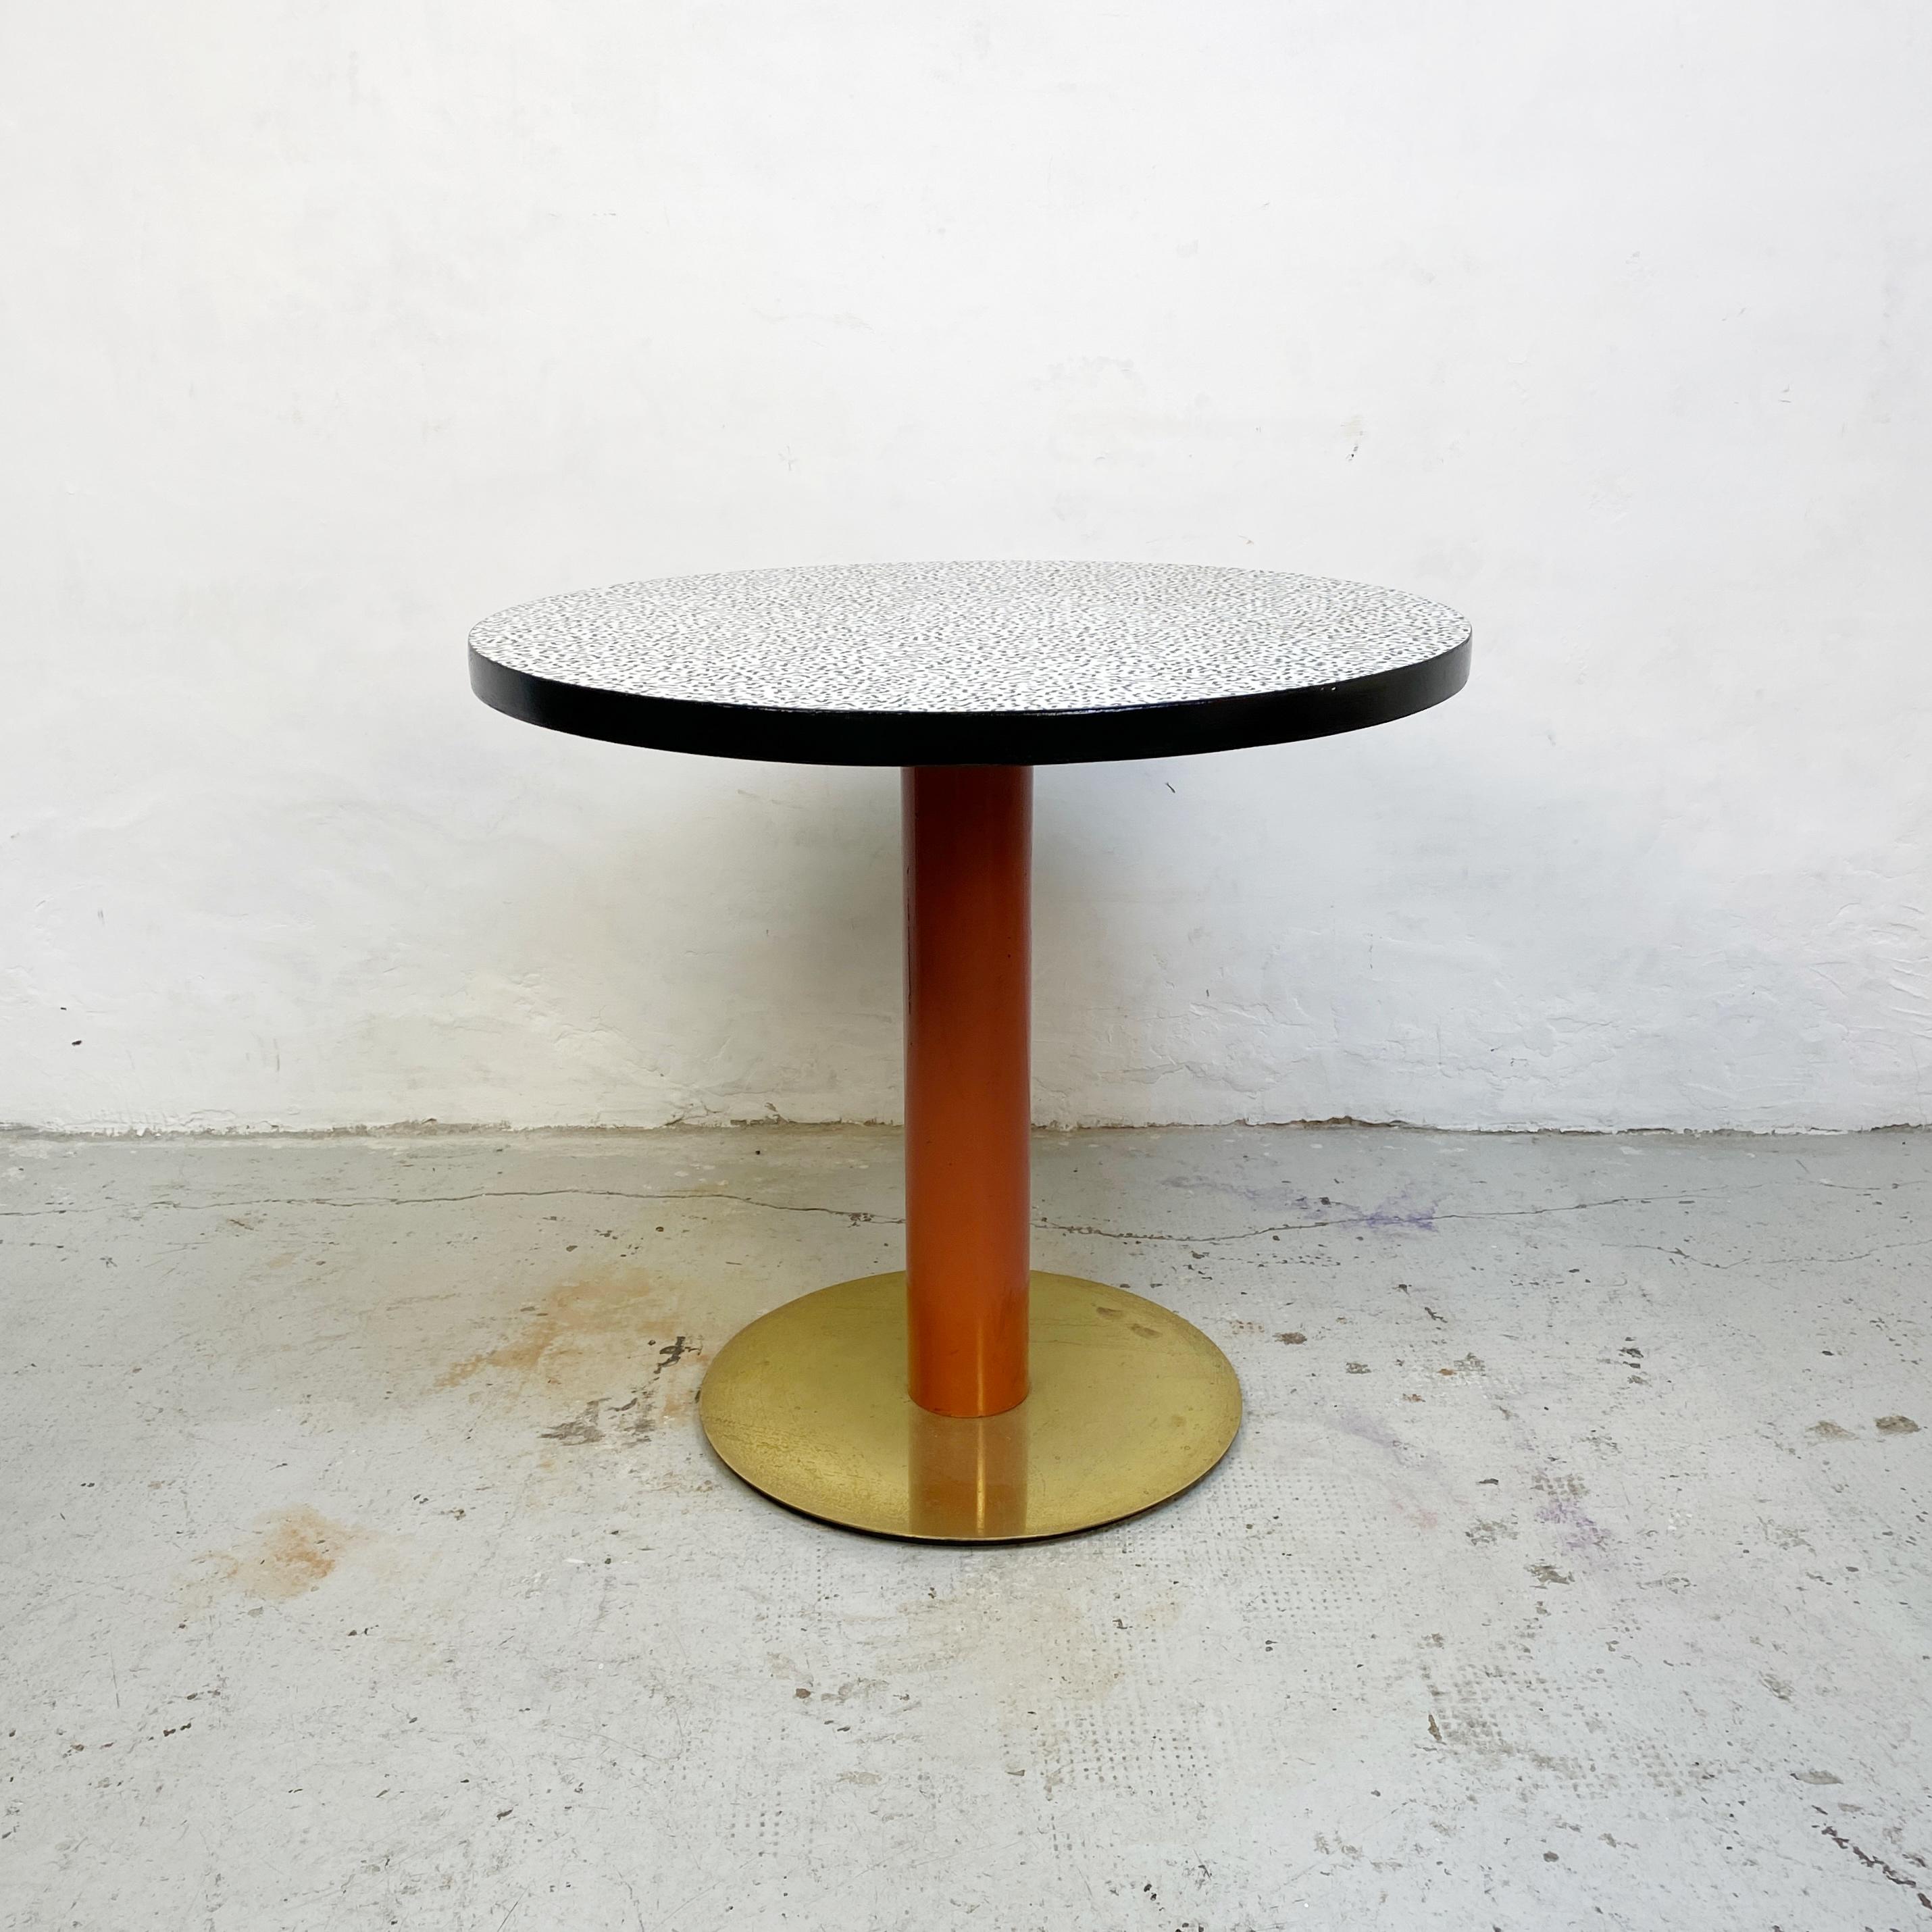 Italian mid-century modern round table with decorative pattern, 1980s
Round table, composed of a round top, covered in Bacterio pattern laminate and metal structure painted in salmon color and base in gold metal, 1980s

In good condition, with